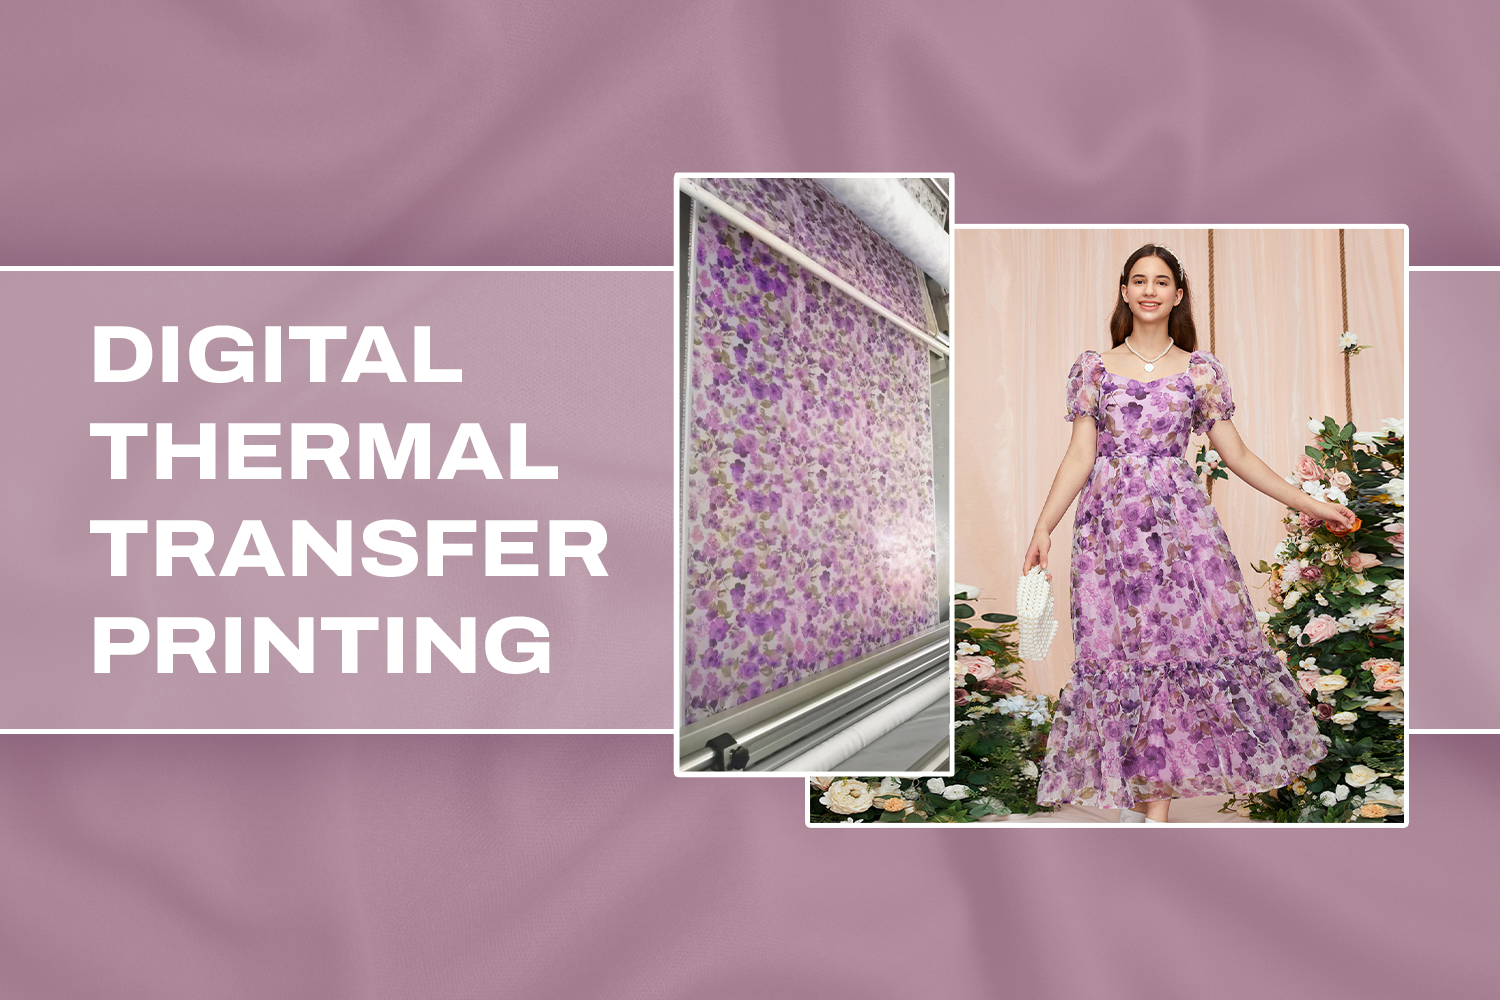 SHEIN Leverages Digital Thermal Transfer Printing Technology to Support Small-Batch Production and Reduce Water Use